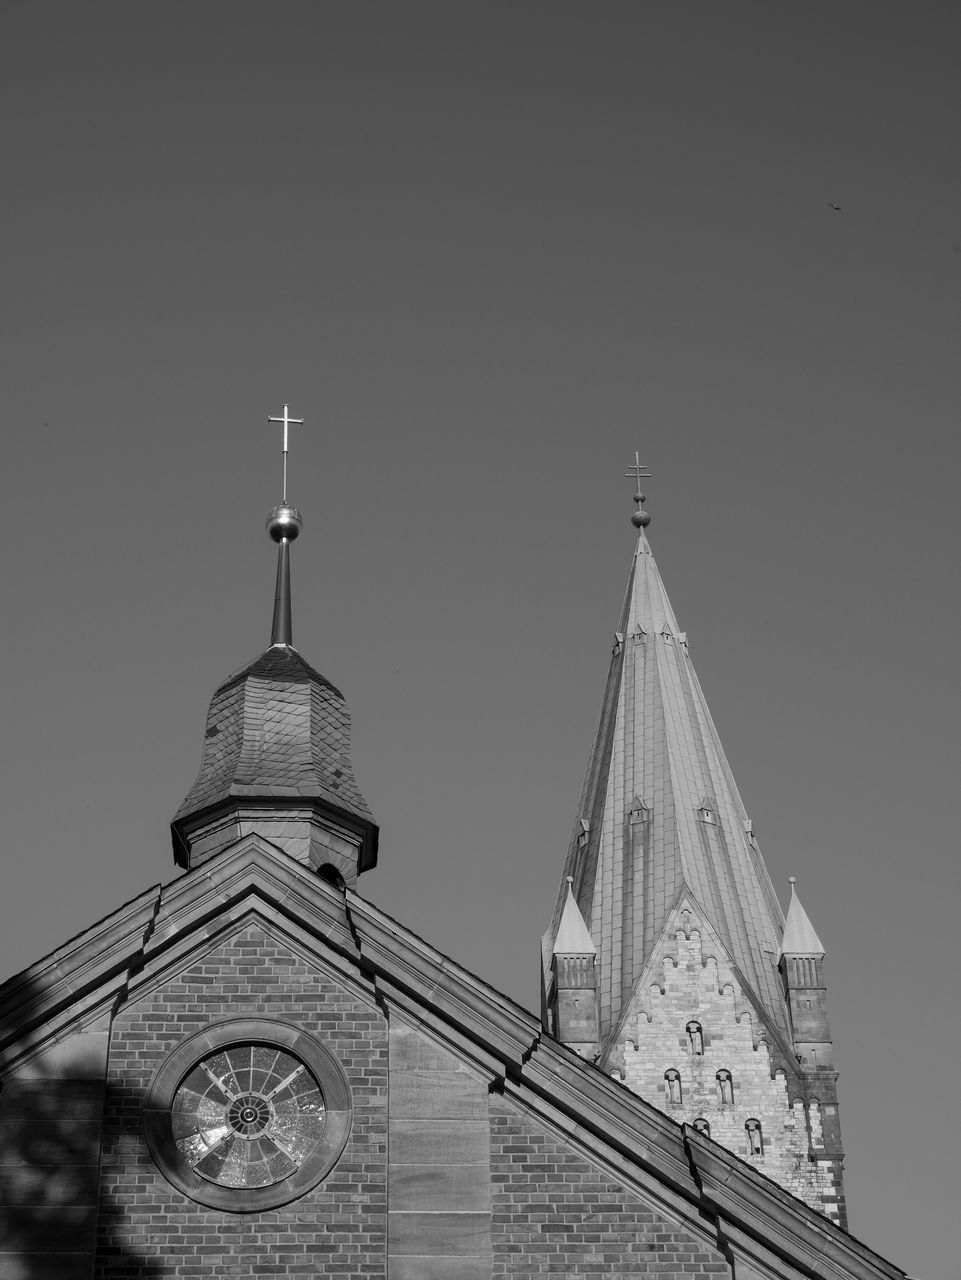 architecture, built structure, black and white, building exterior, place of worship, monochrome photography, monochrome, religion, belief, sky, tower, building, steeple, no people, spirituality, travel destinations, low angle view, white, nature, spire, clock, clear sky, catholicism, history, the past, worship, travel, time, city, outdoors, landmark, day